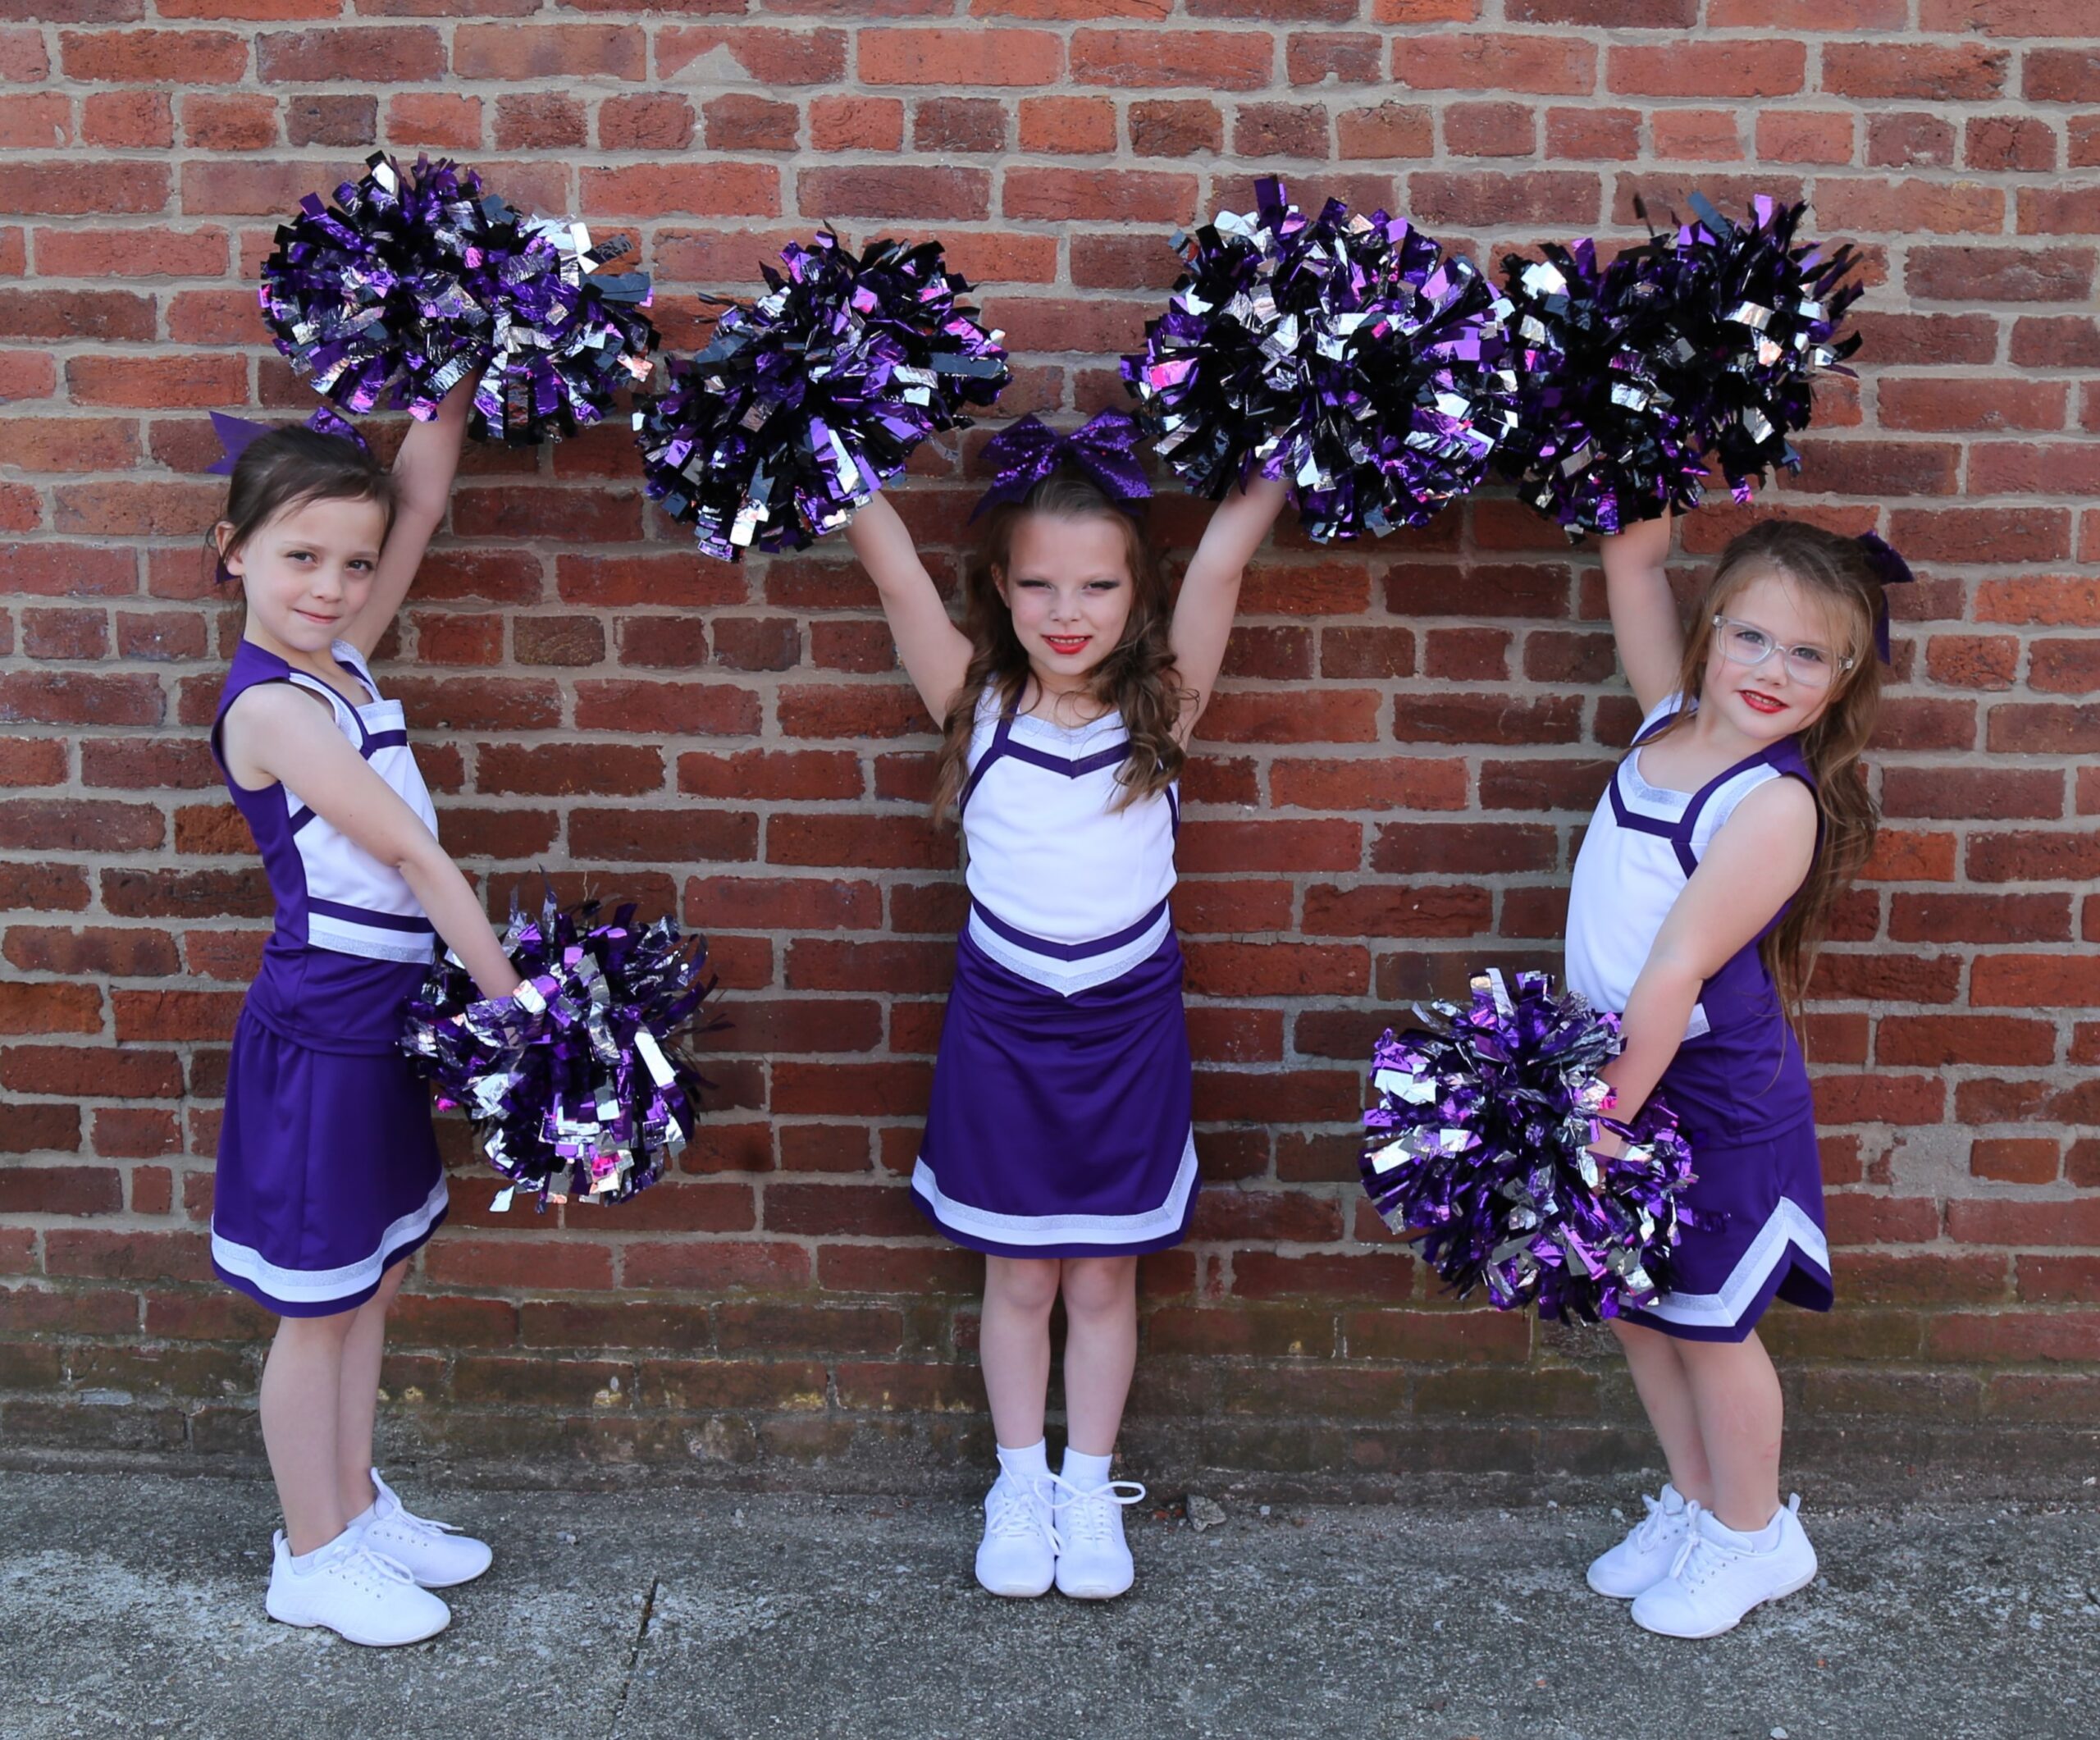 Sparkling Spinners cheerleading group posing against a brick wall